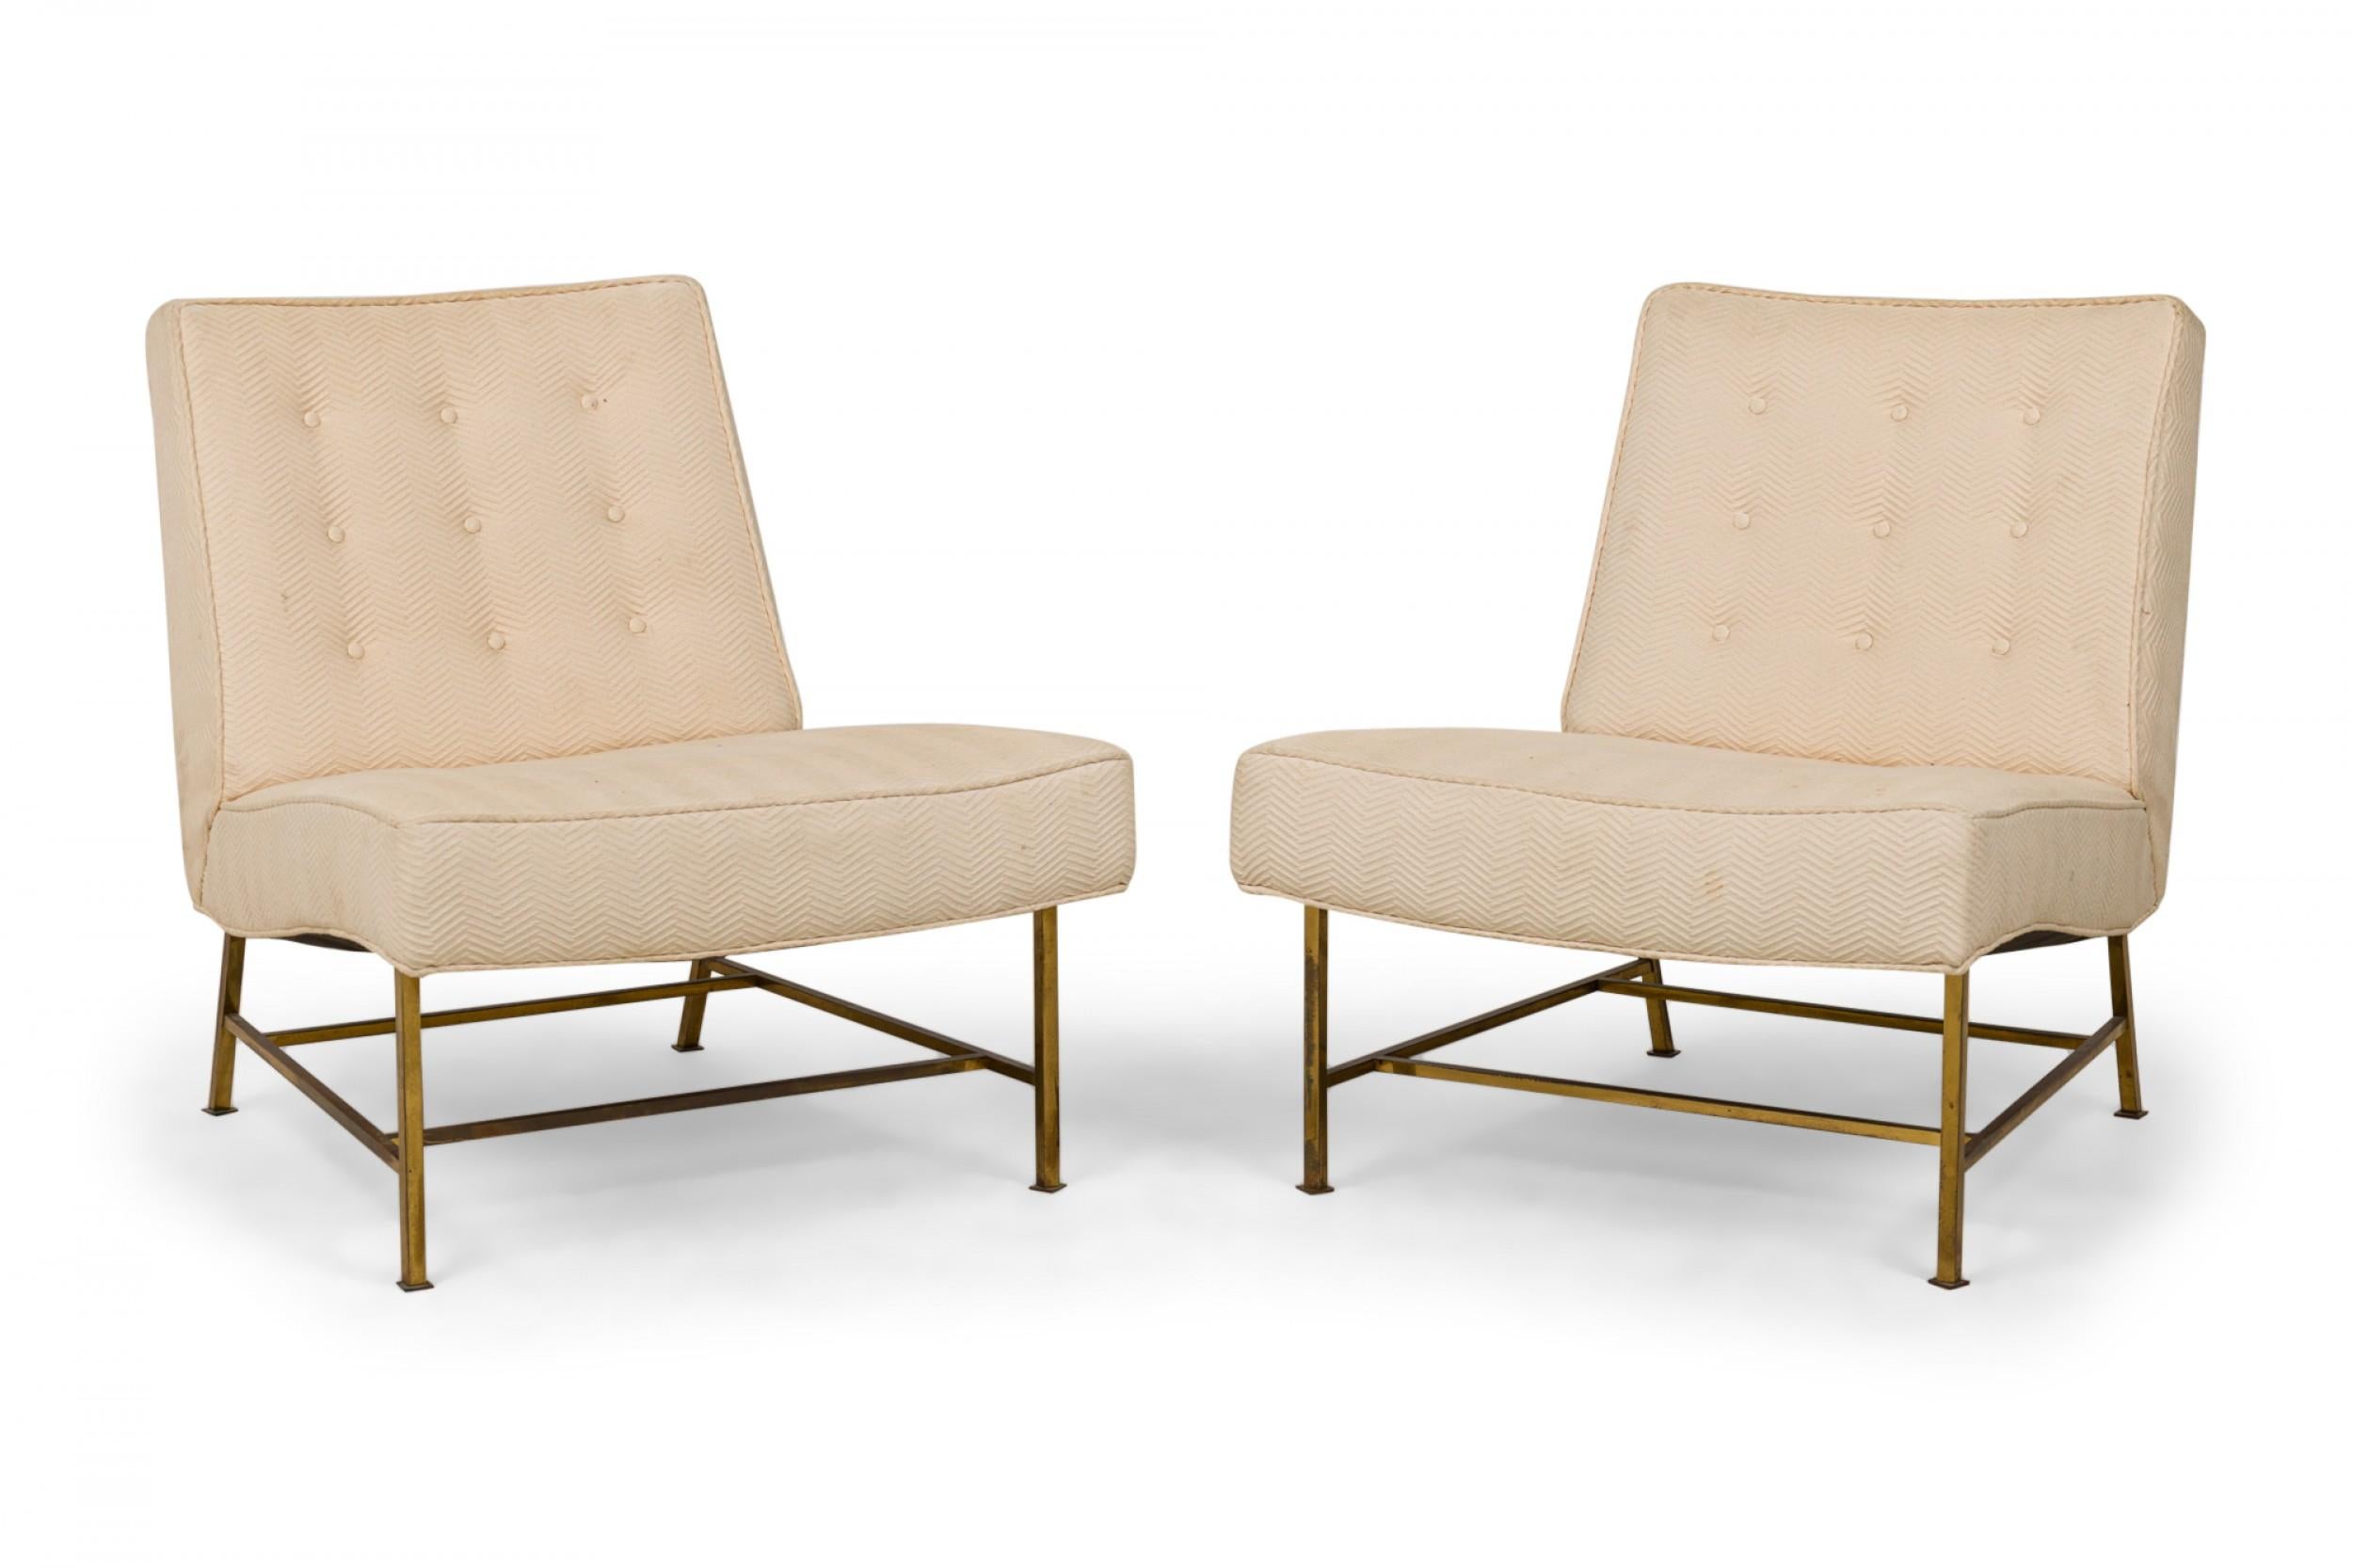 Pair of Harvey Probber Beige Zig-Zag Textured Upholstery and Brass Slipper Chair For Sale